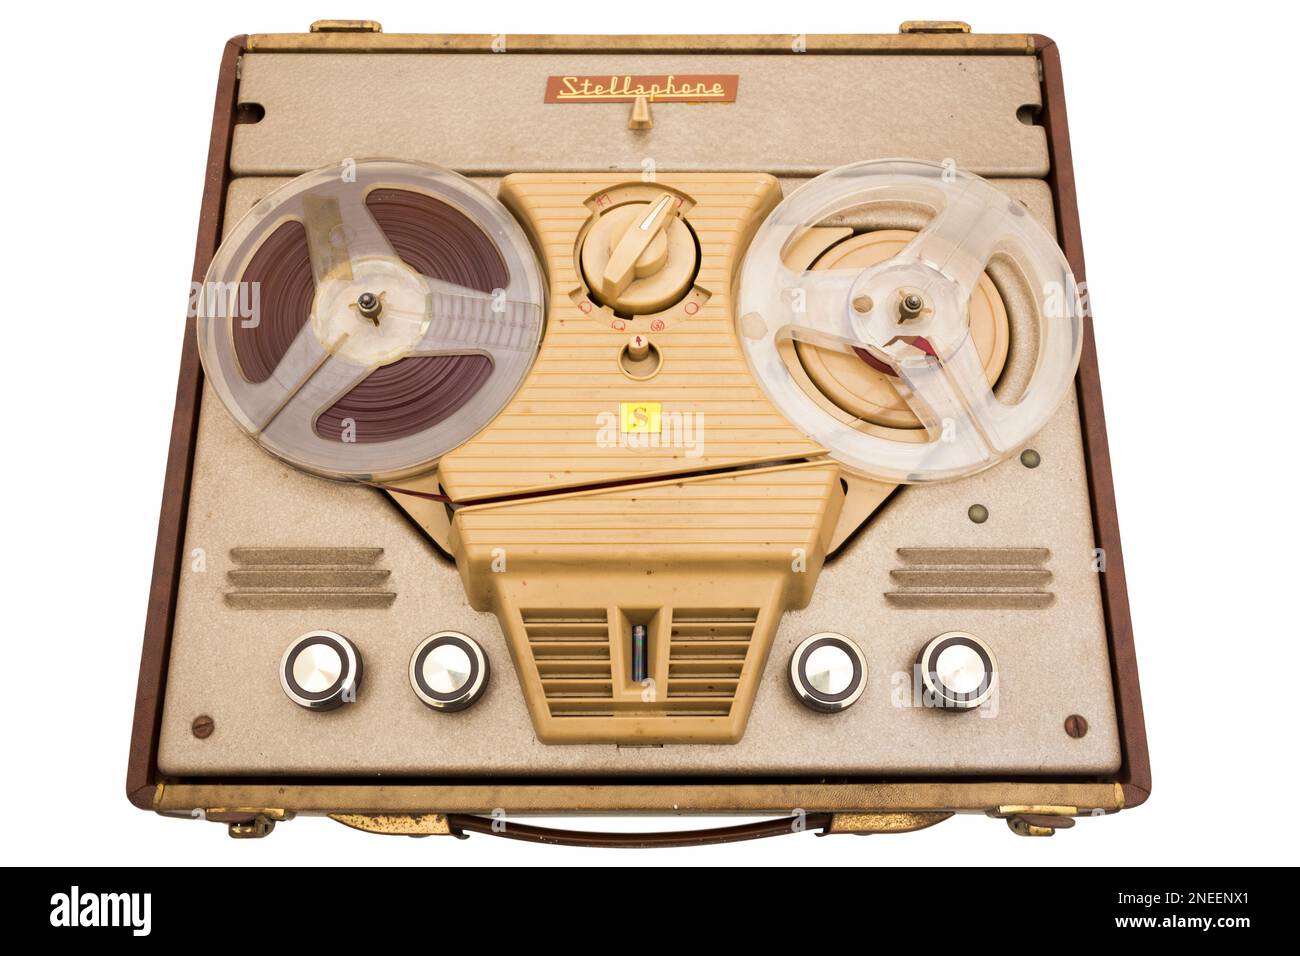 https://c8.alamy.com/comp/2NEENX1/stellaphone-brand-reel-to-reel-recorder-fitted-with-synchrotape-high-fidelity-audio-tape-typical-of-1950s-and-1960s-equipment-uk-studio-133-2NEENX1.jpg